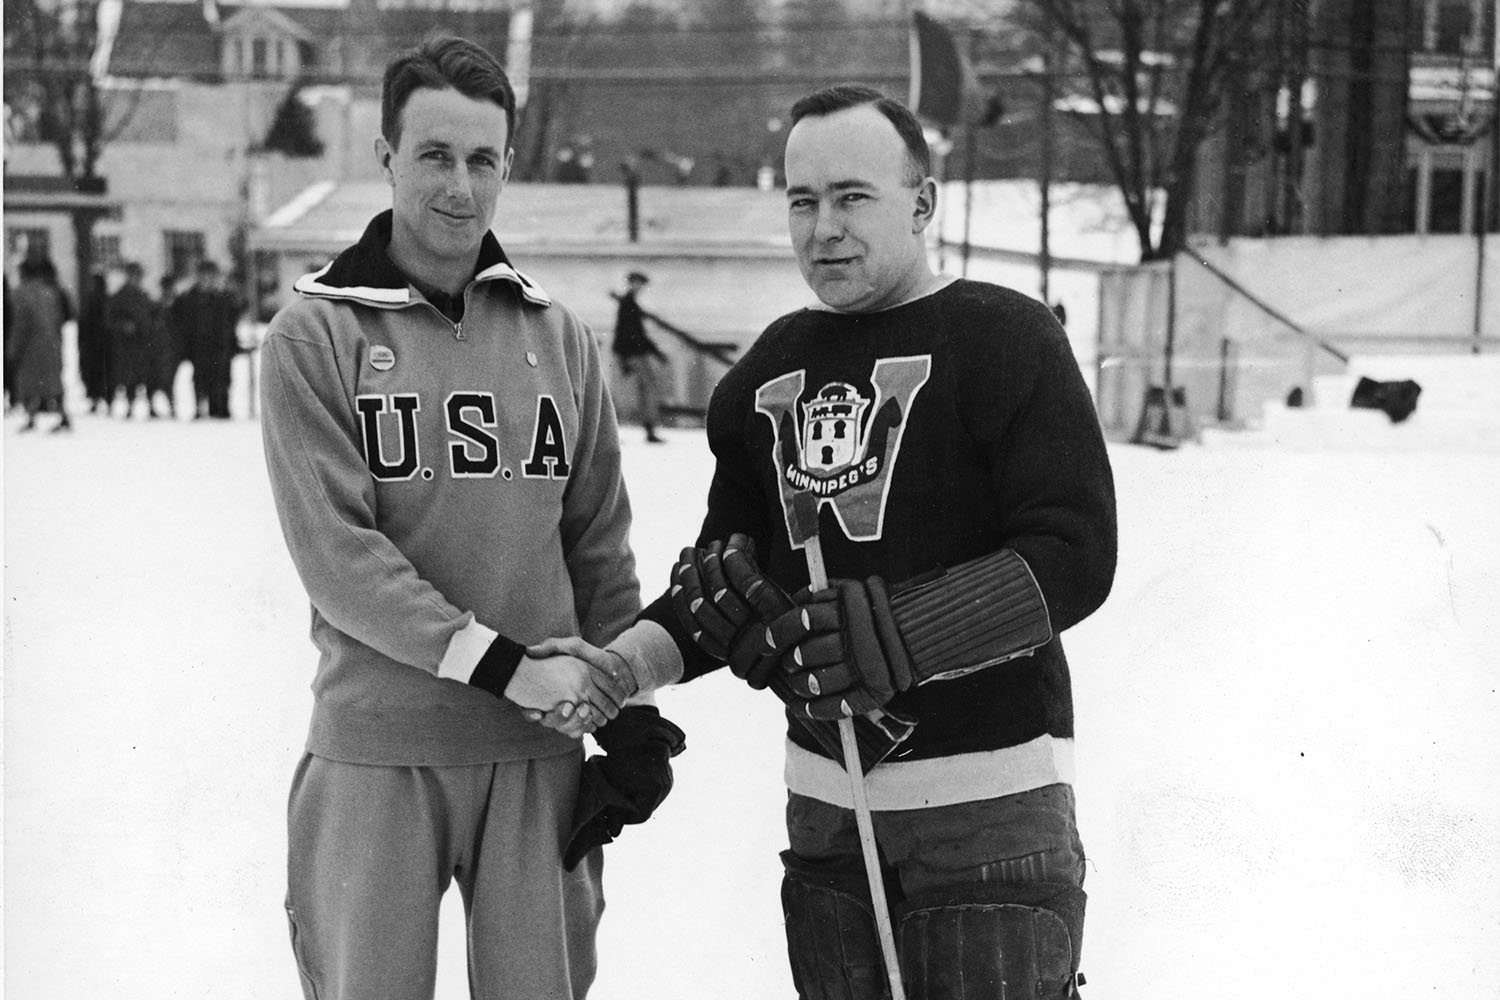 The Canadian and USA hockey captains shaking hands at the 1932 olympics 